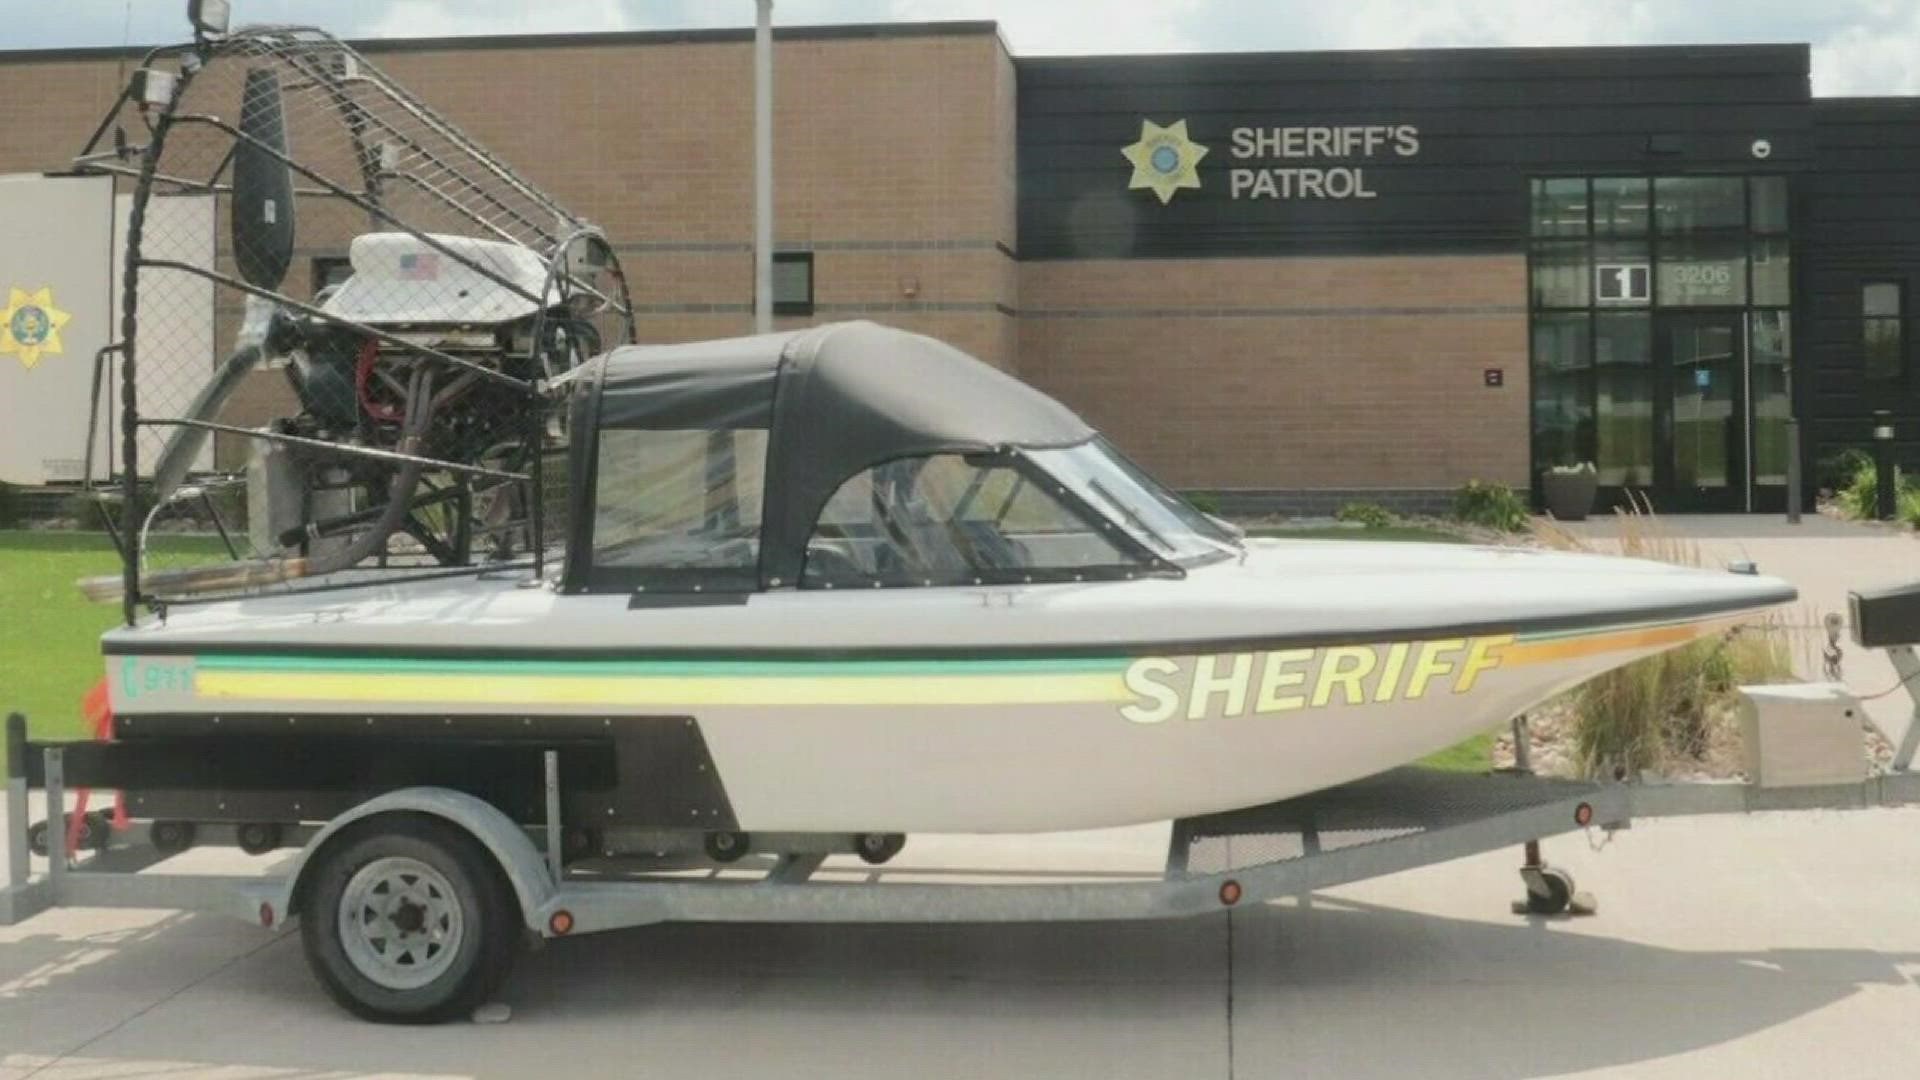 The Sheriff's Office said the 2009 18-foot airboat was donated back in 2013.